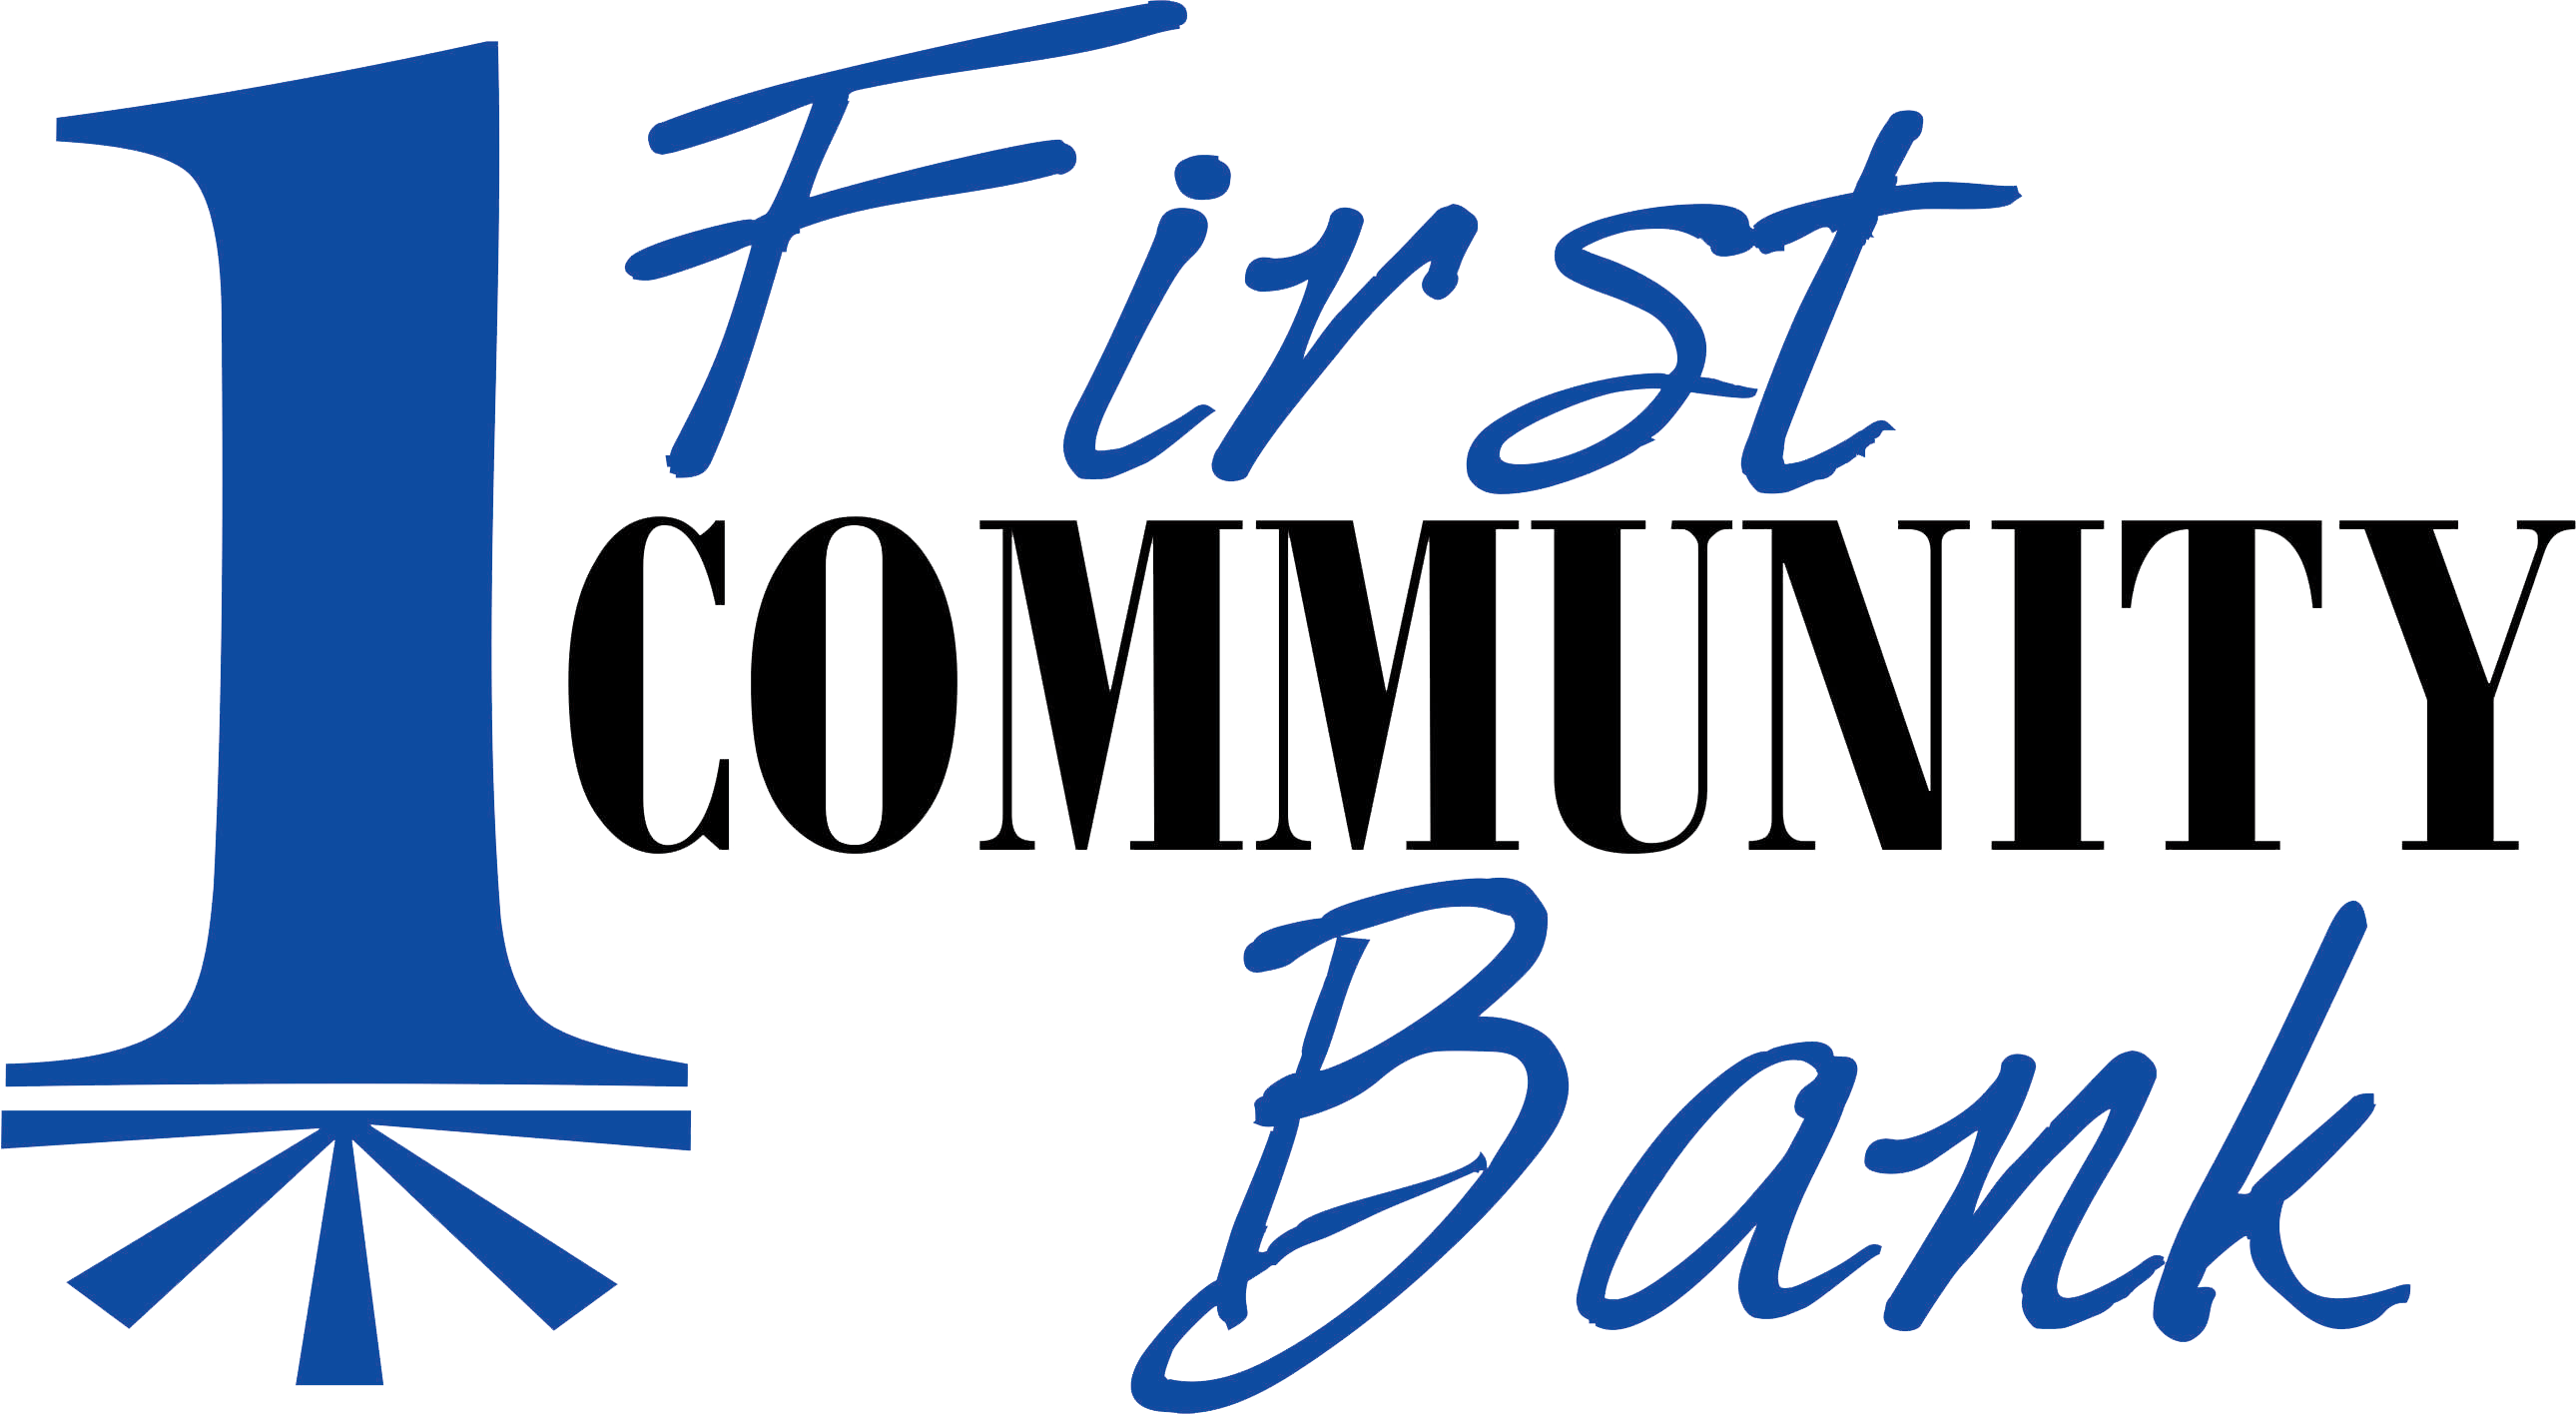 About Us First Community Bank